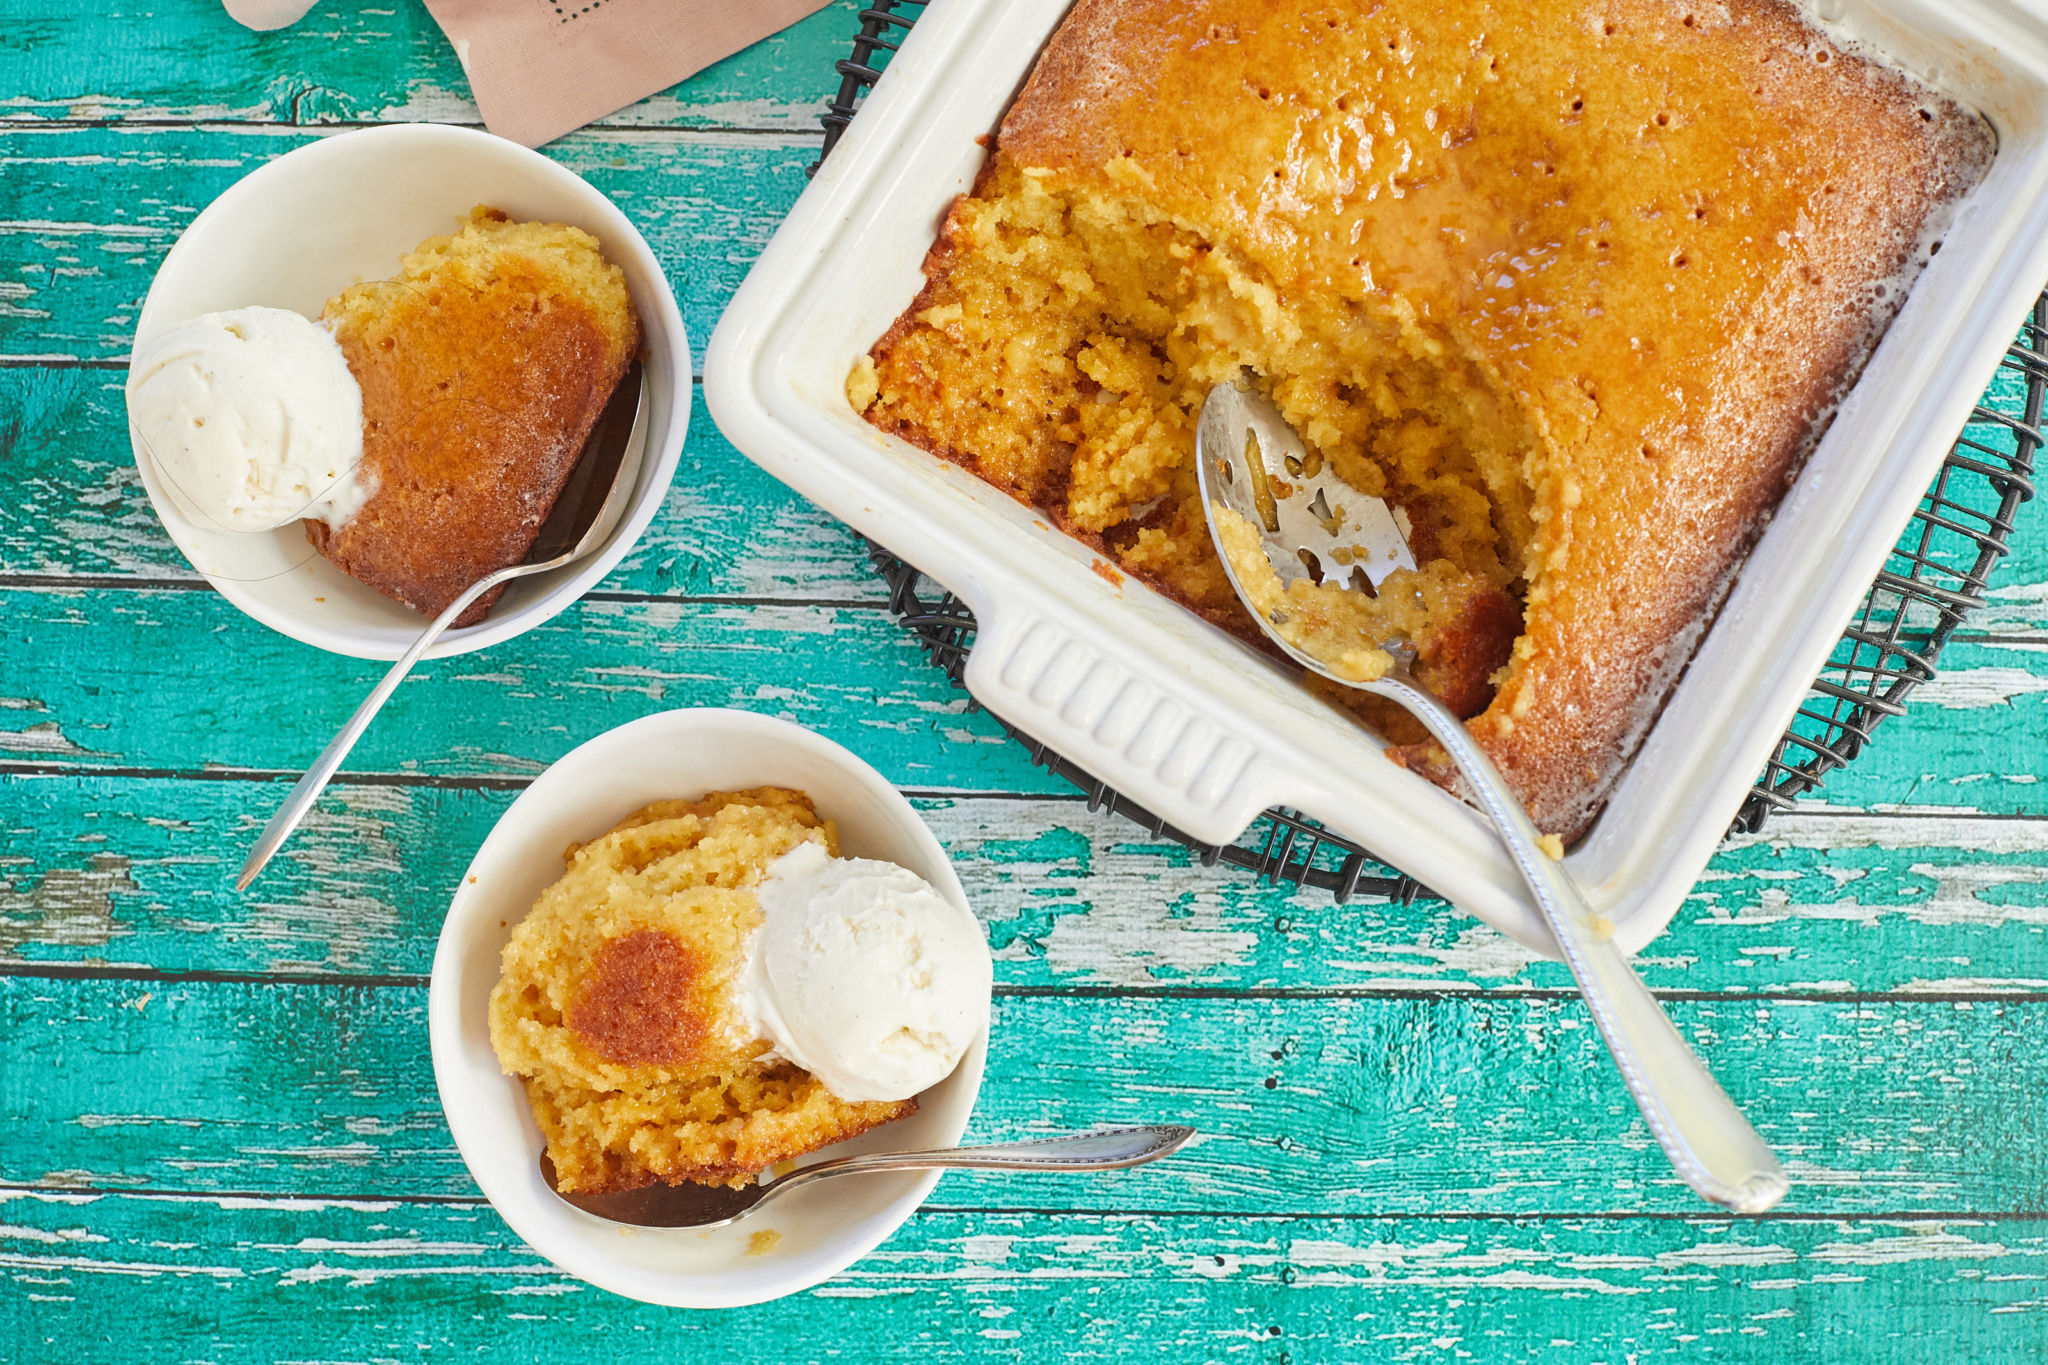 Malva Pudding, or cake, portioned out into two bowls.